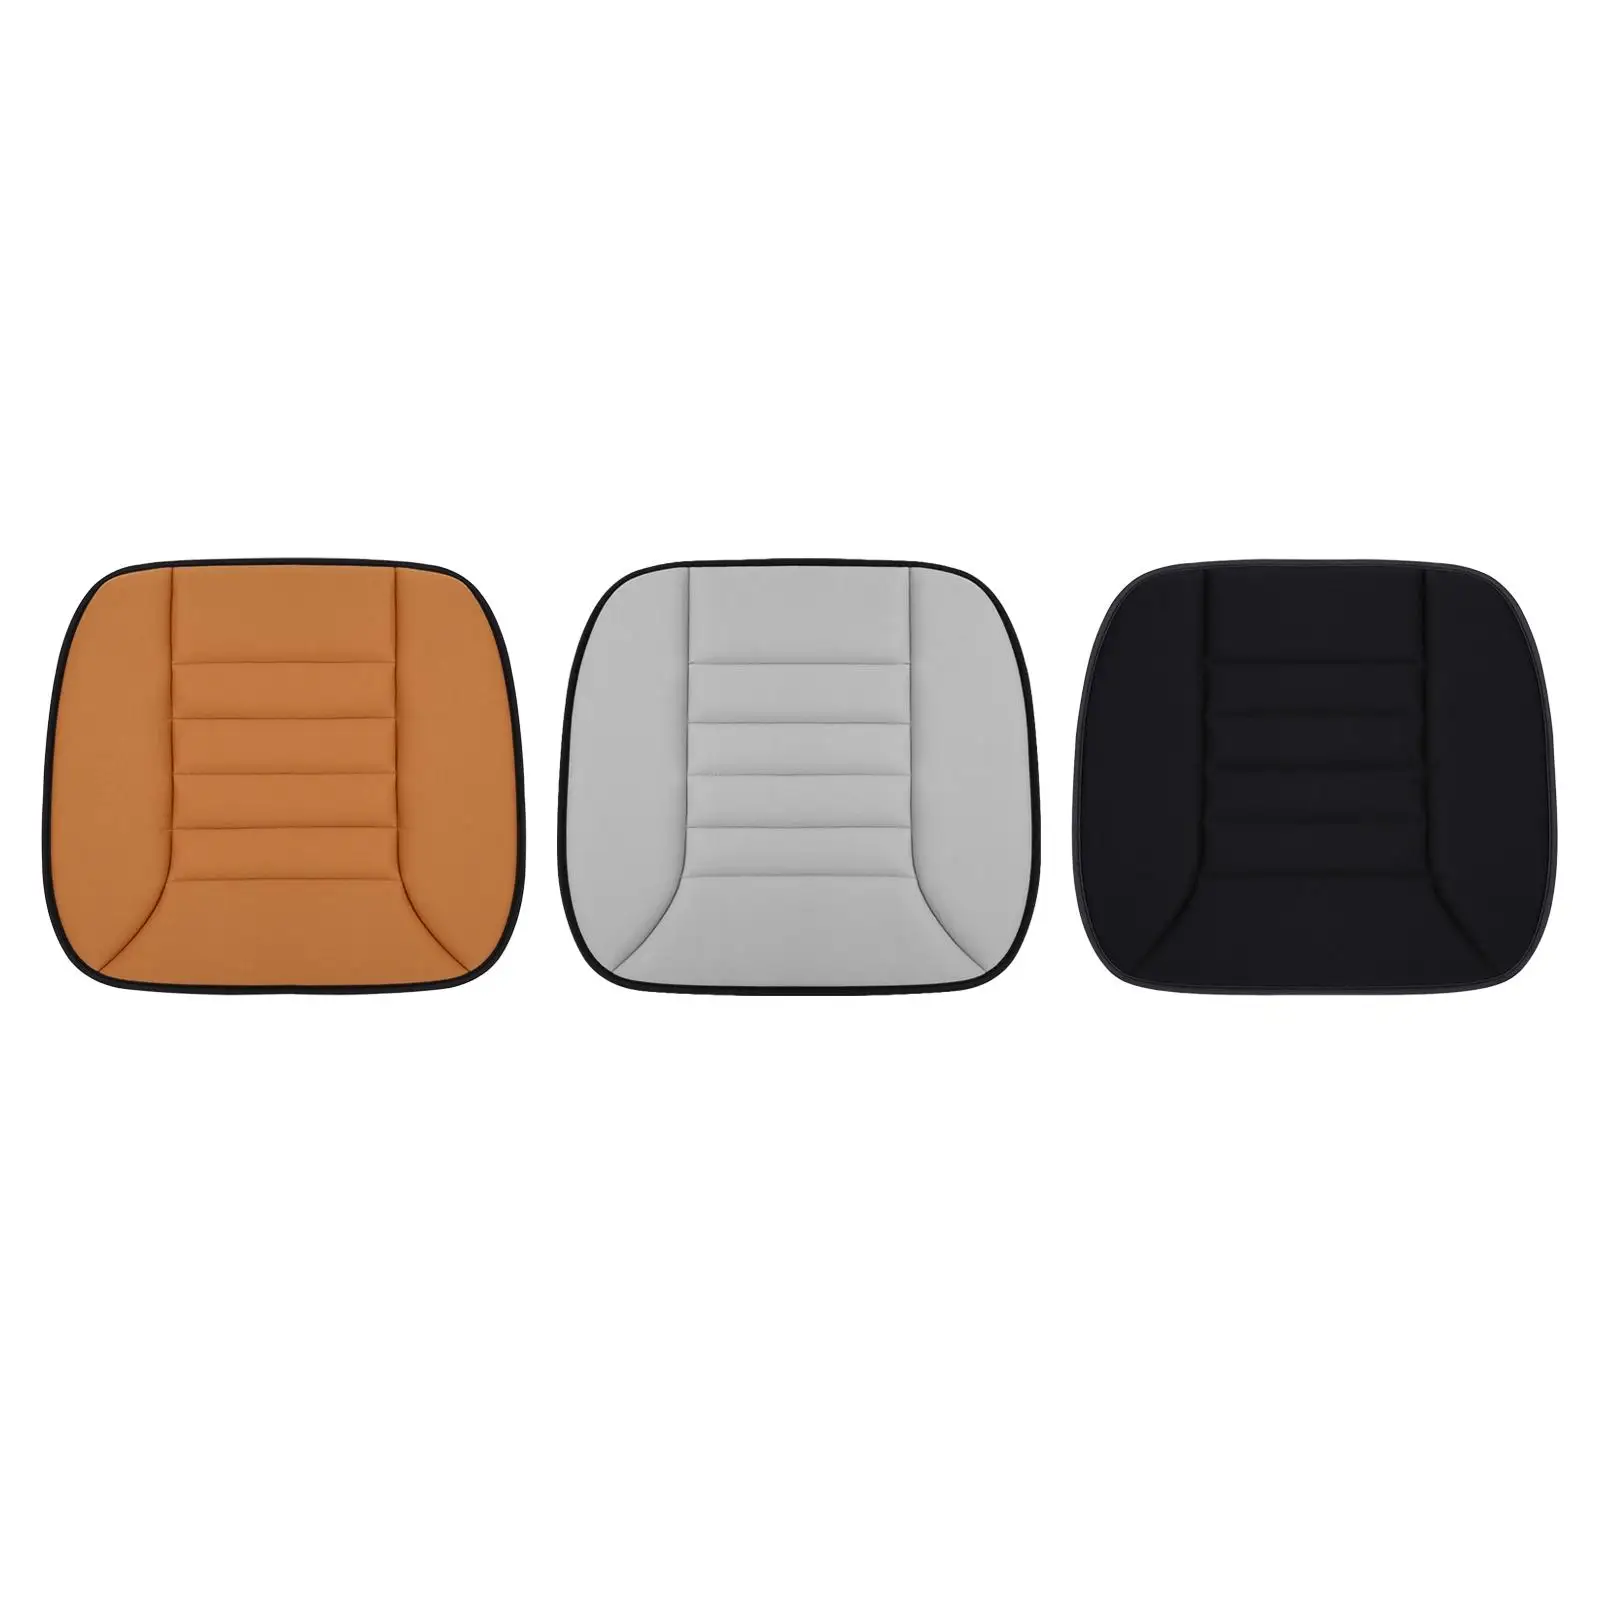 Car Seat Cushion Direct Replaces Stylish Equipment Spare Anti Slip Auto Seat Cover Mat for Truck SUV Van Vehicles